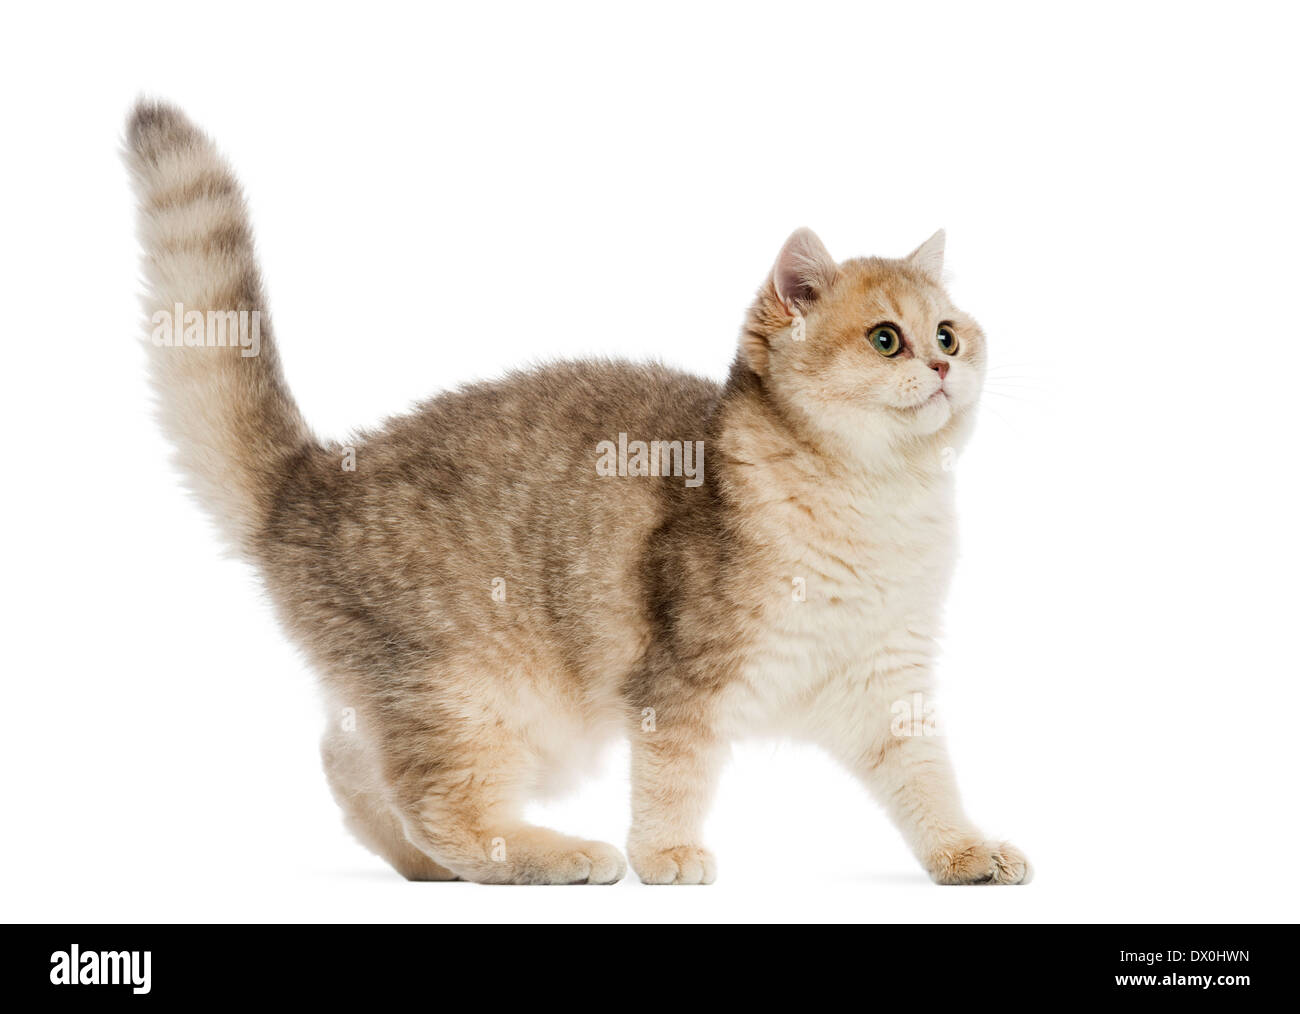 British shorthair looking alert in front of white background Stock Photo